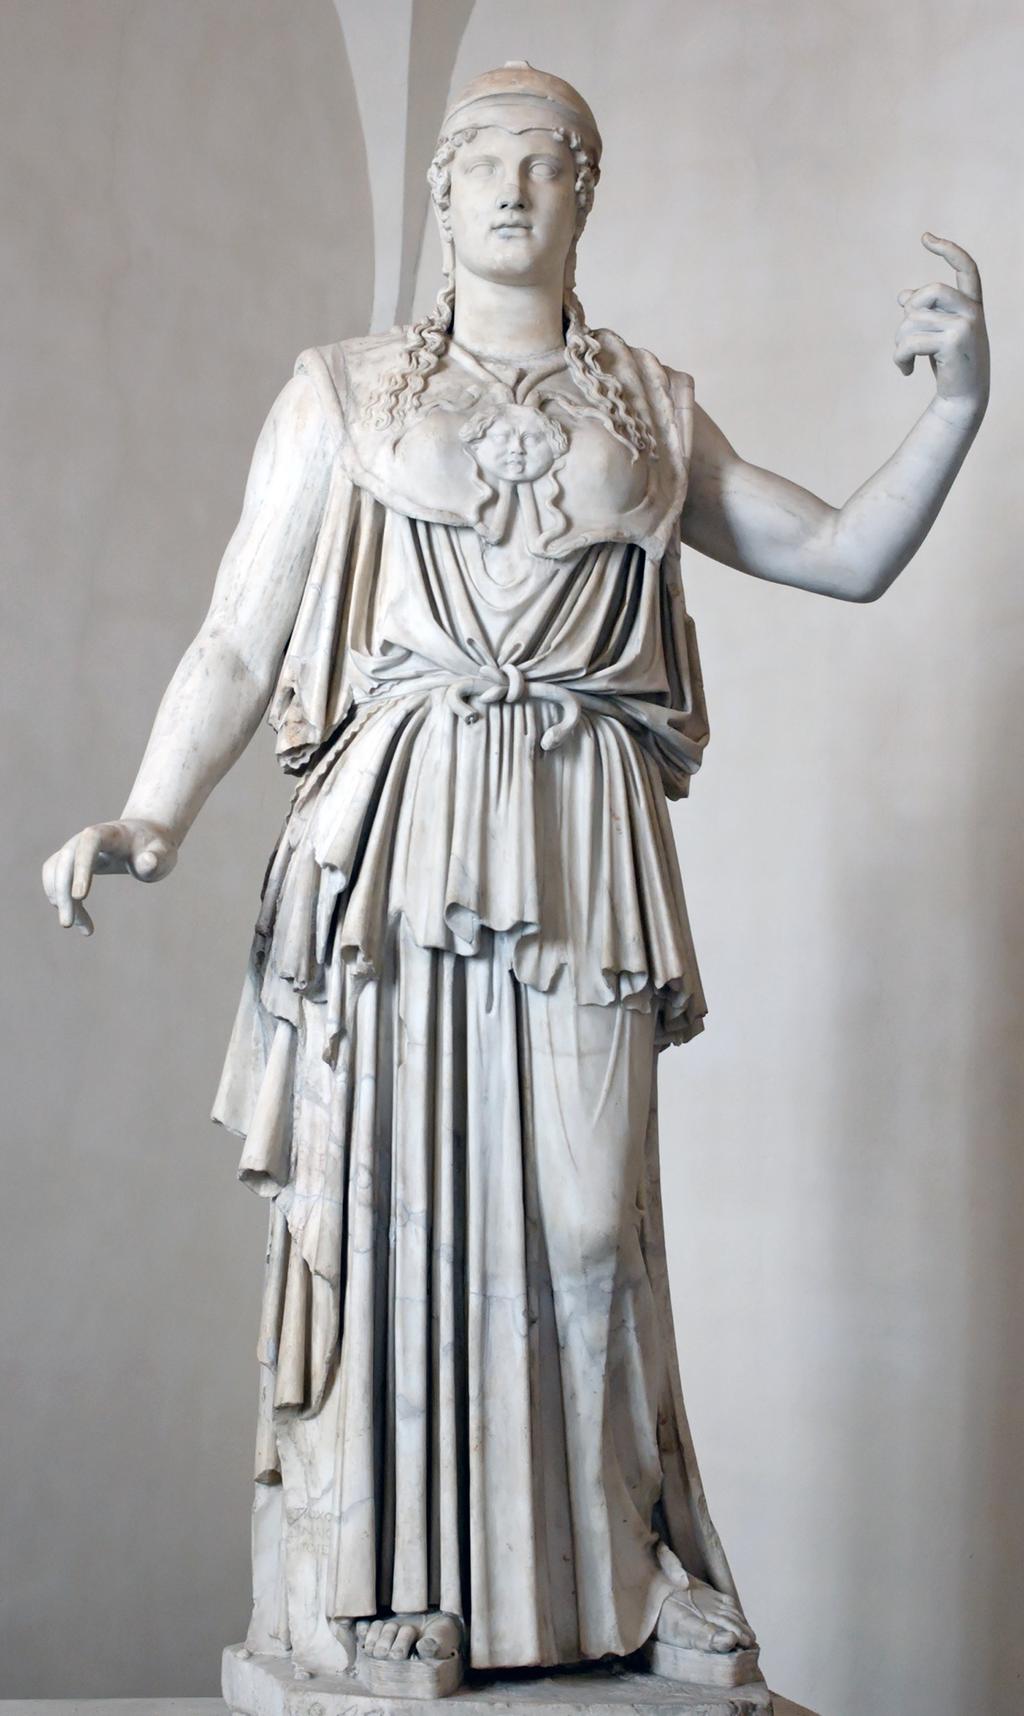 Myth of Athena Metis became pregnant by Zeus.